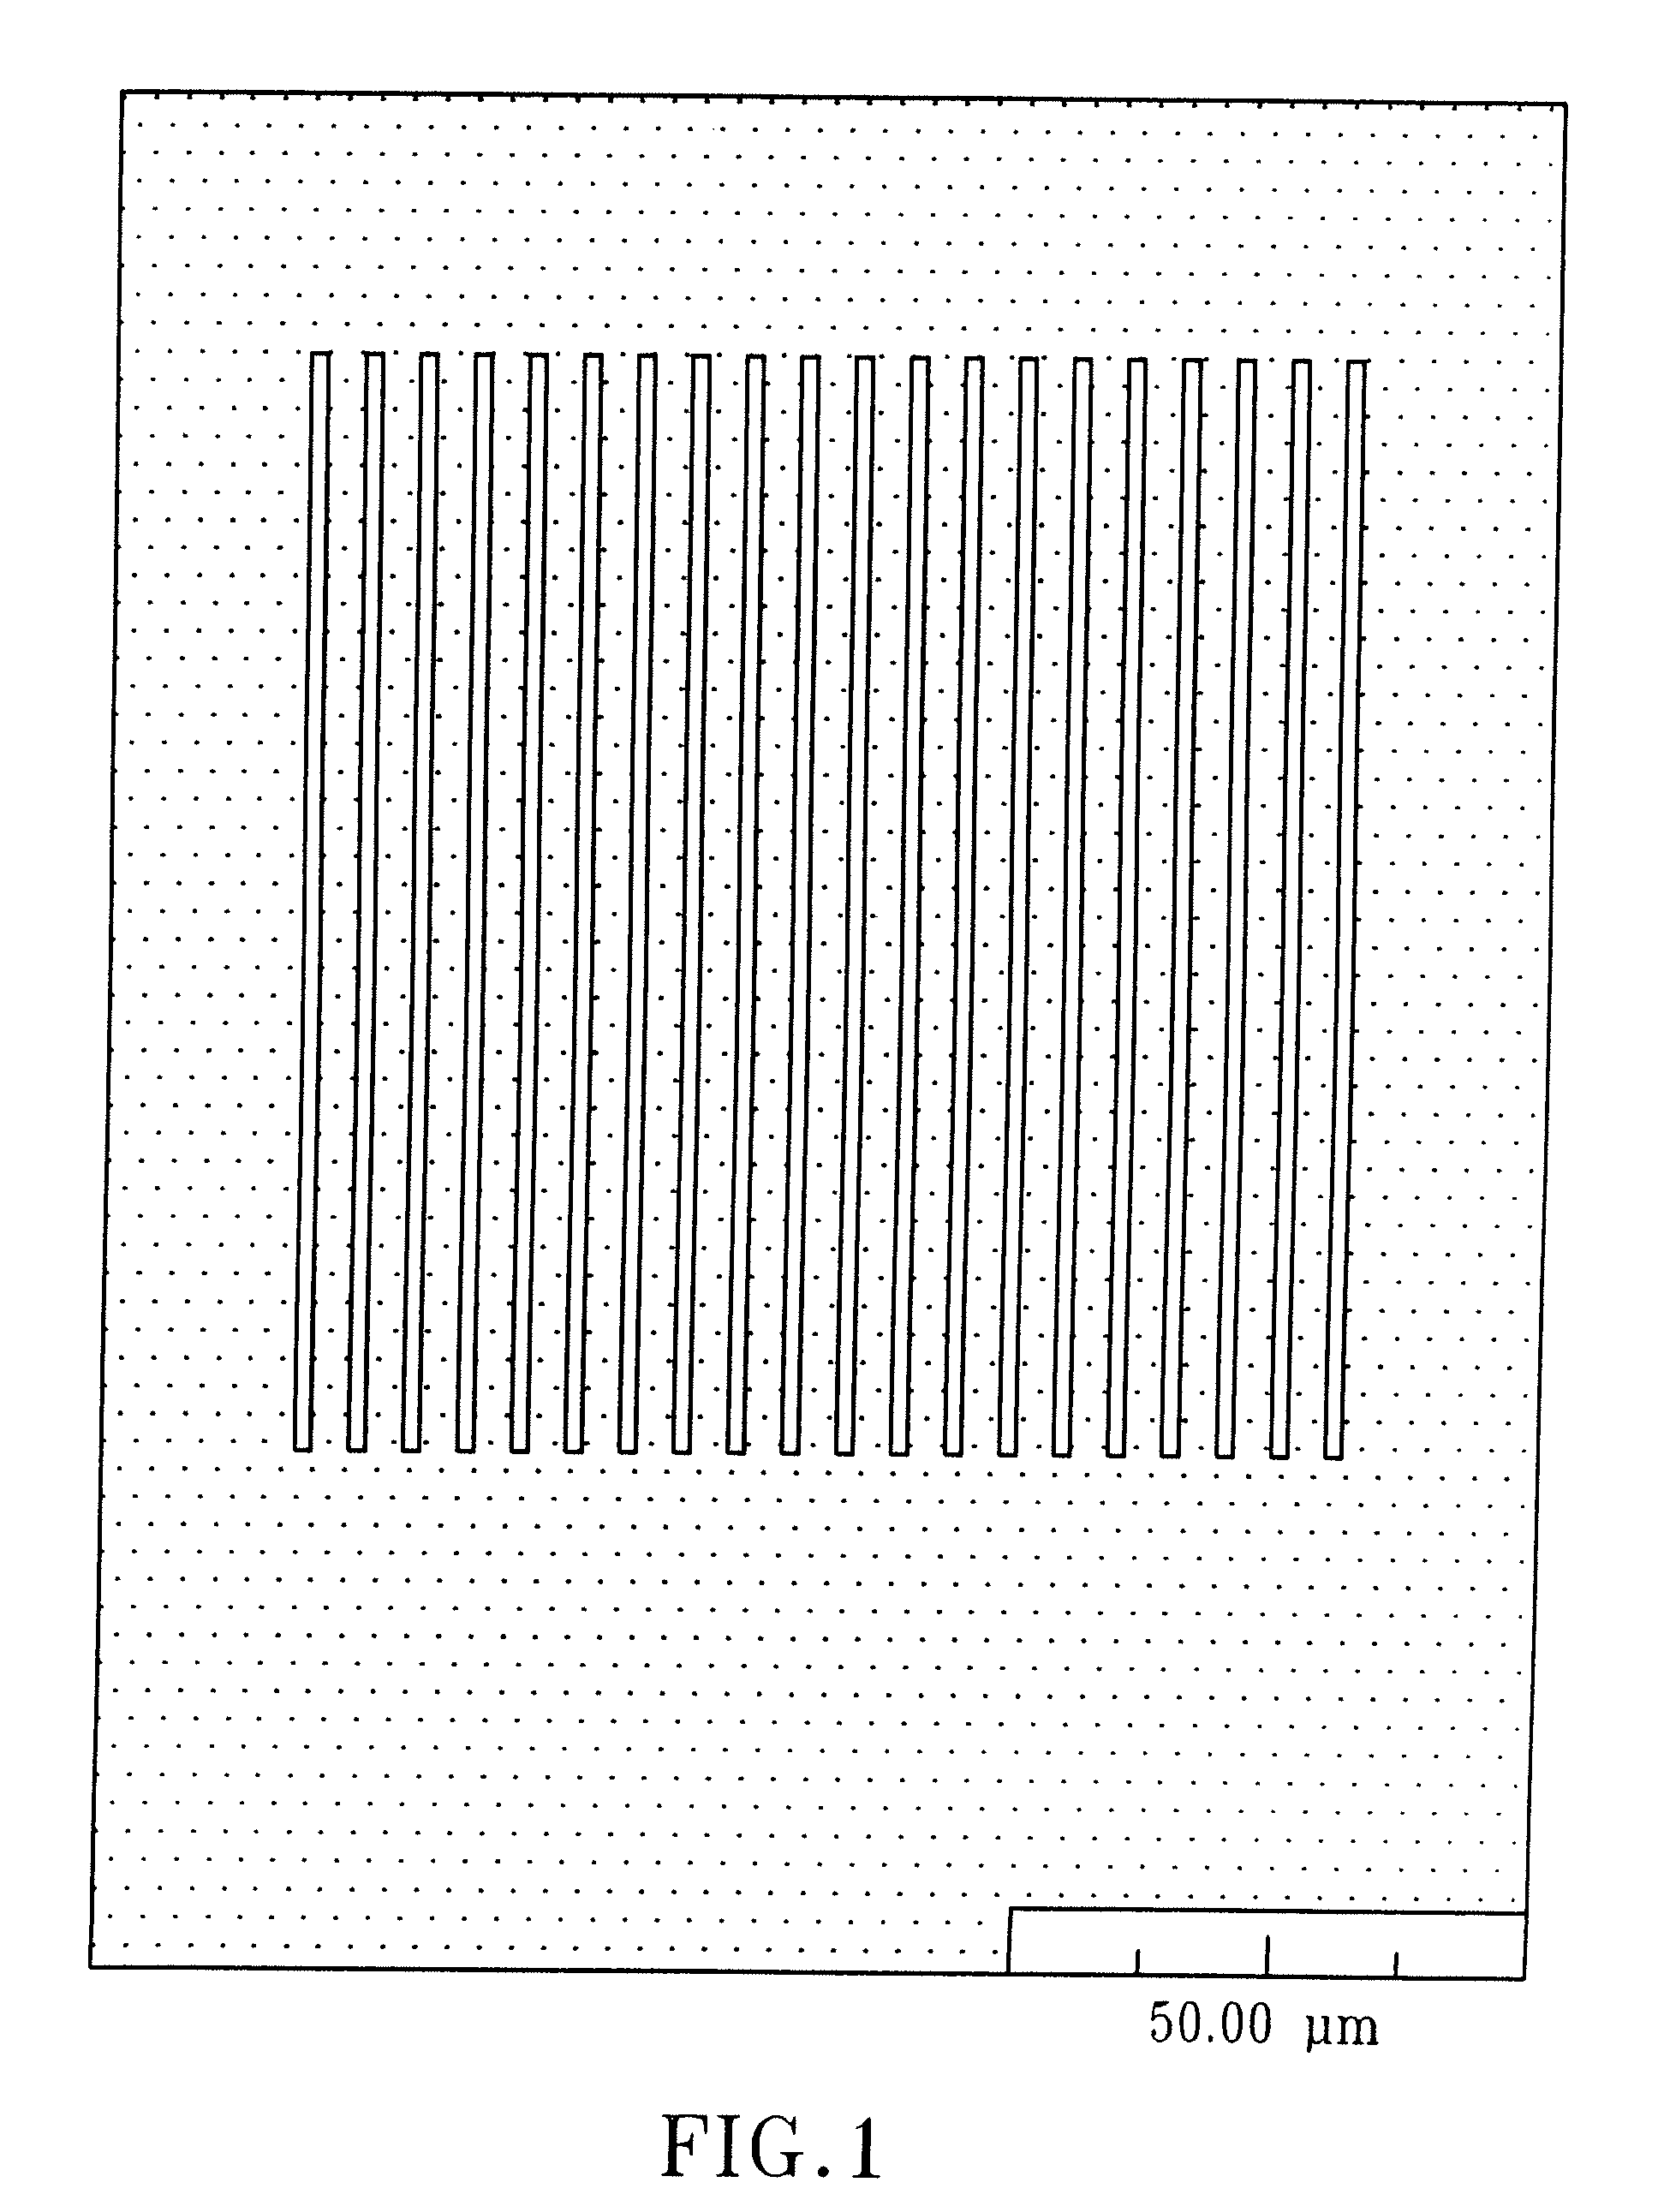 Optical material and method for modifying the refractive index